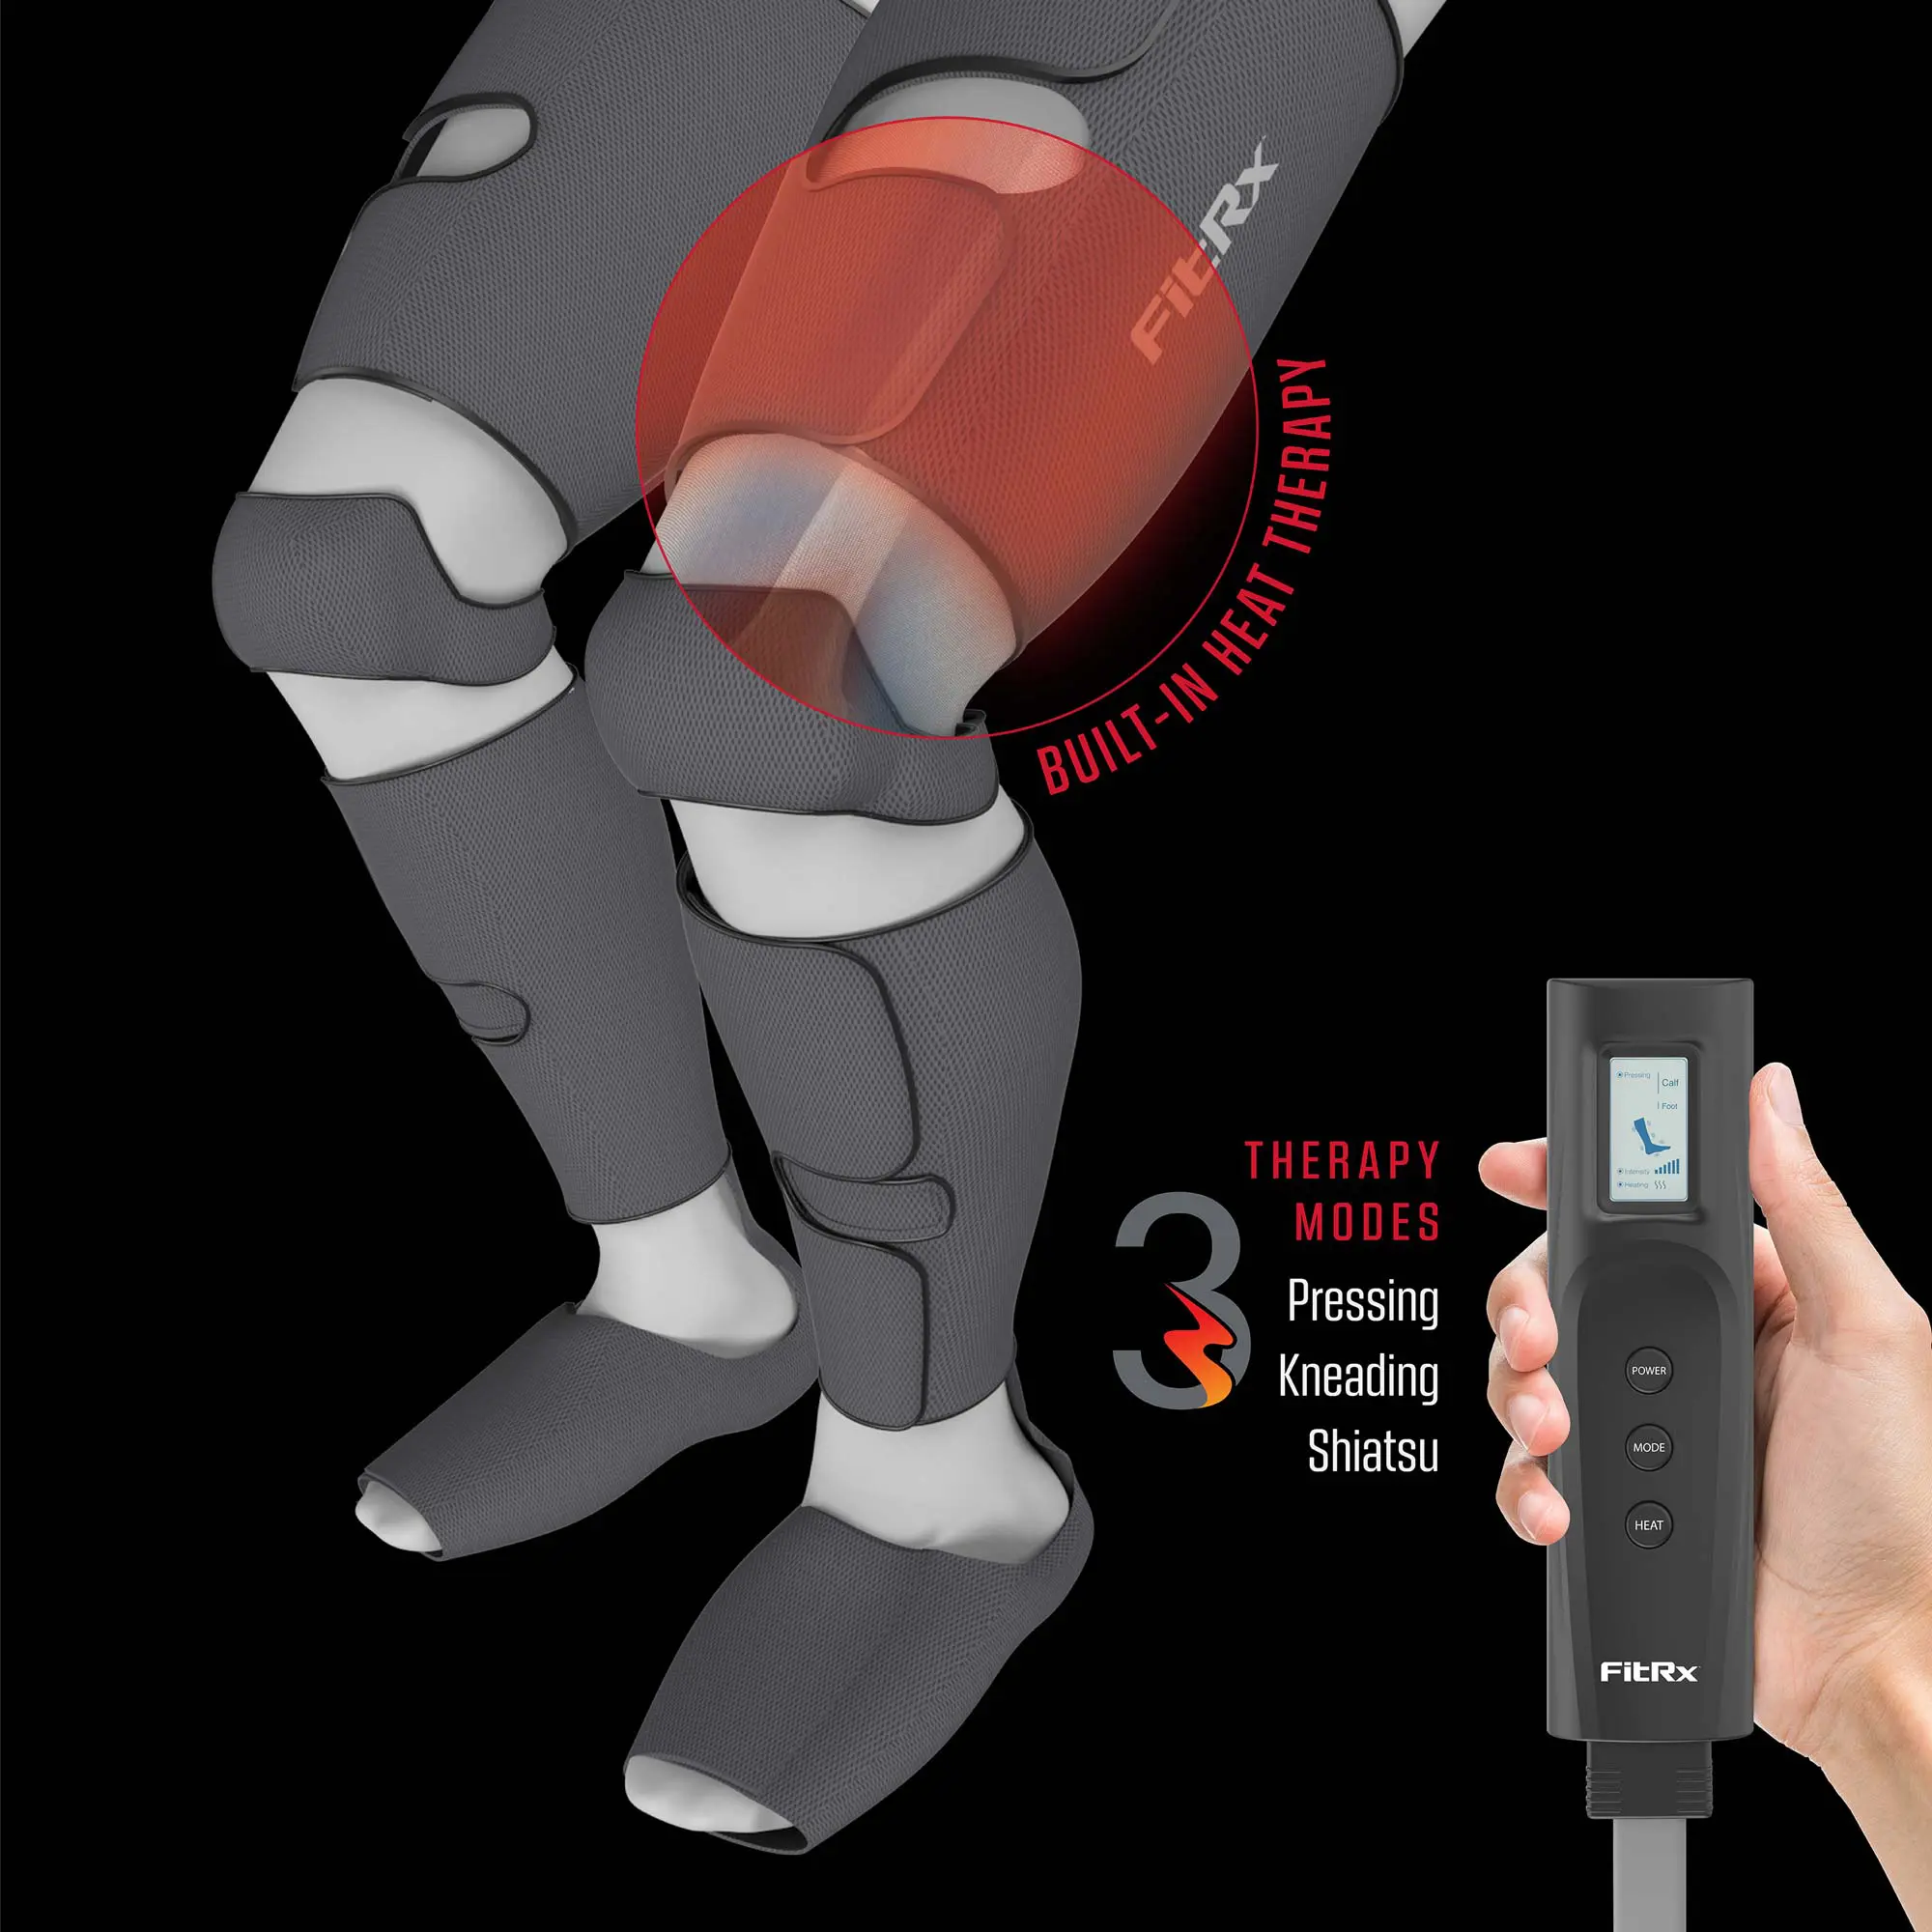 https://fitrxrecovery.com/wp-content/uploads/2023/02/firx_leg-compression-02.webp